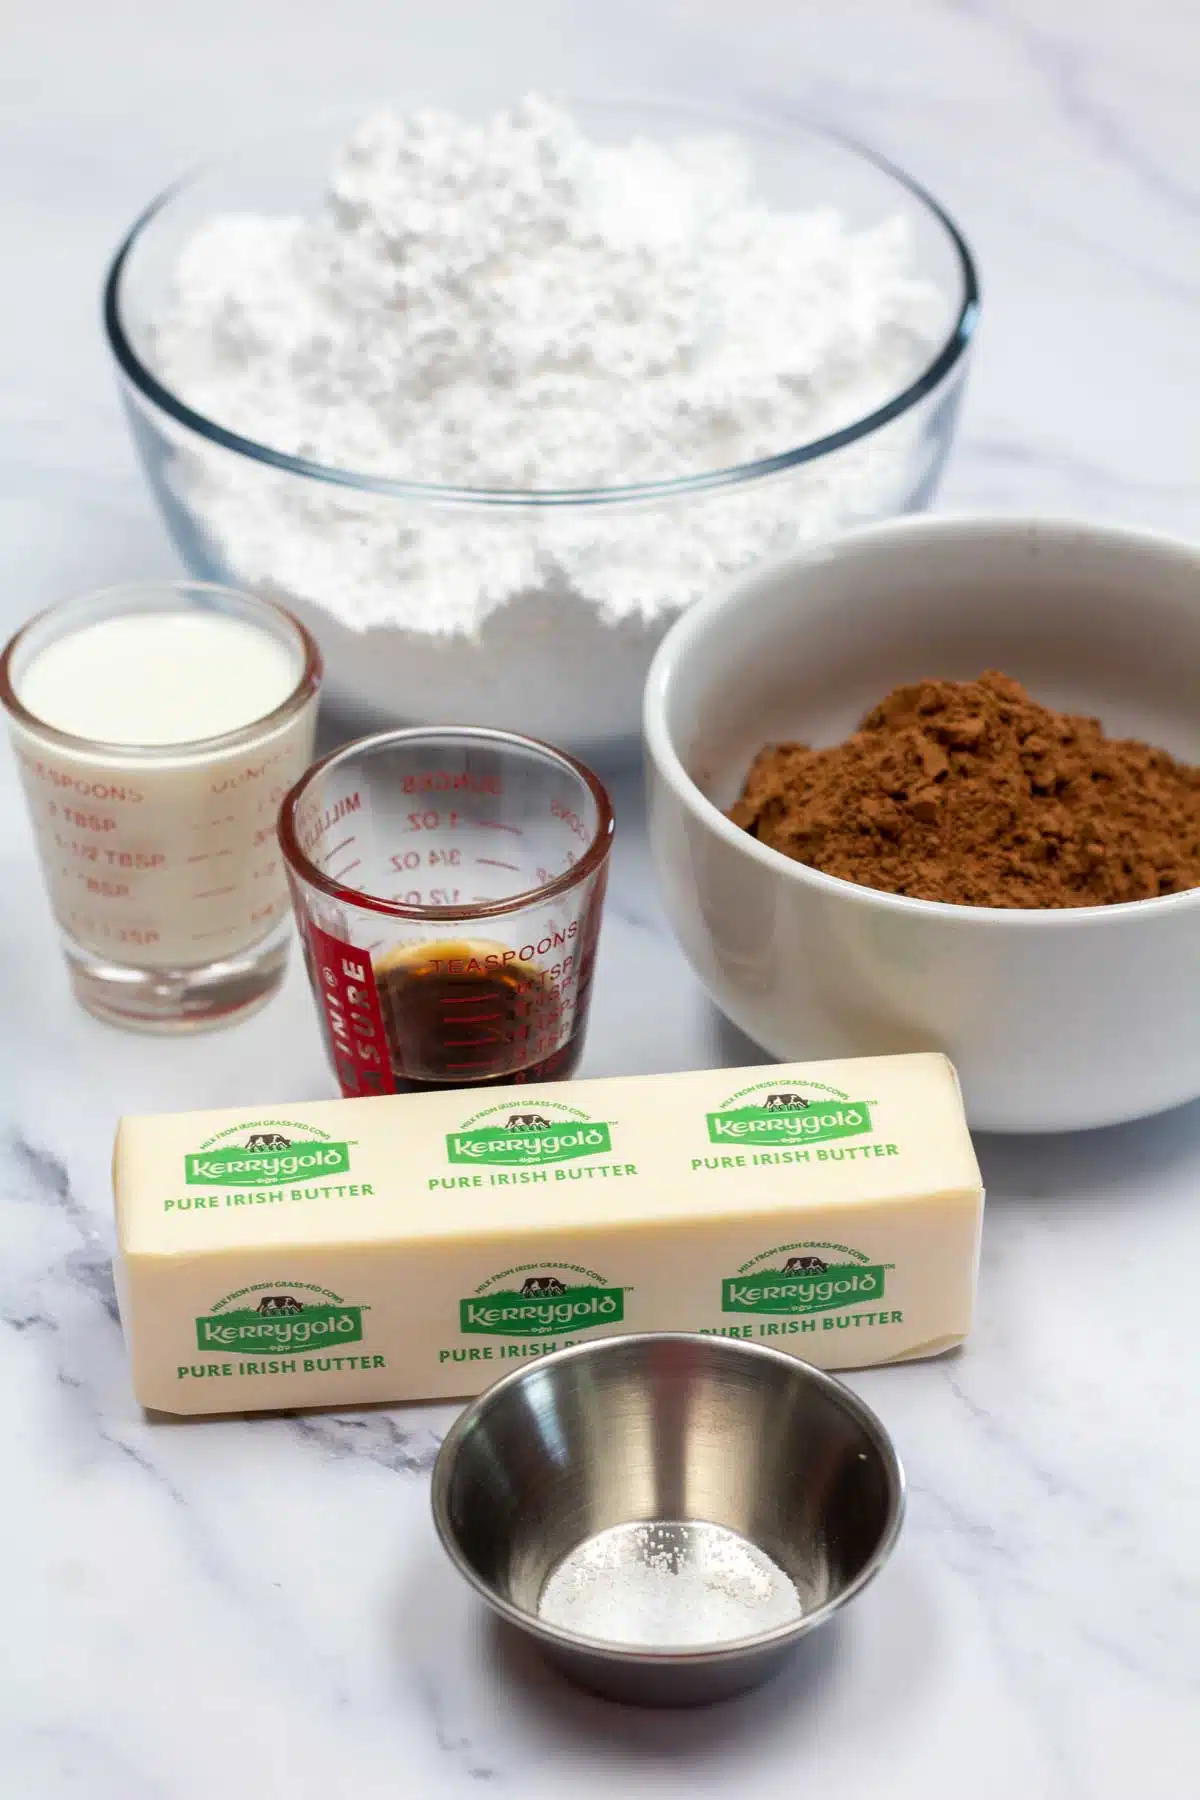 Tall image showing ingredients needed for chocolate frosting.